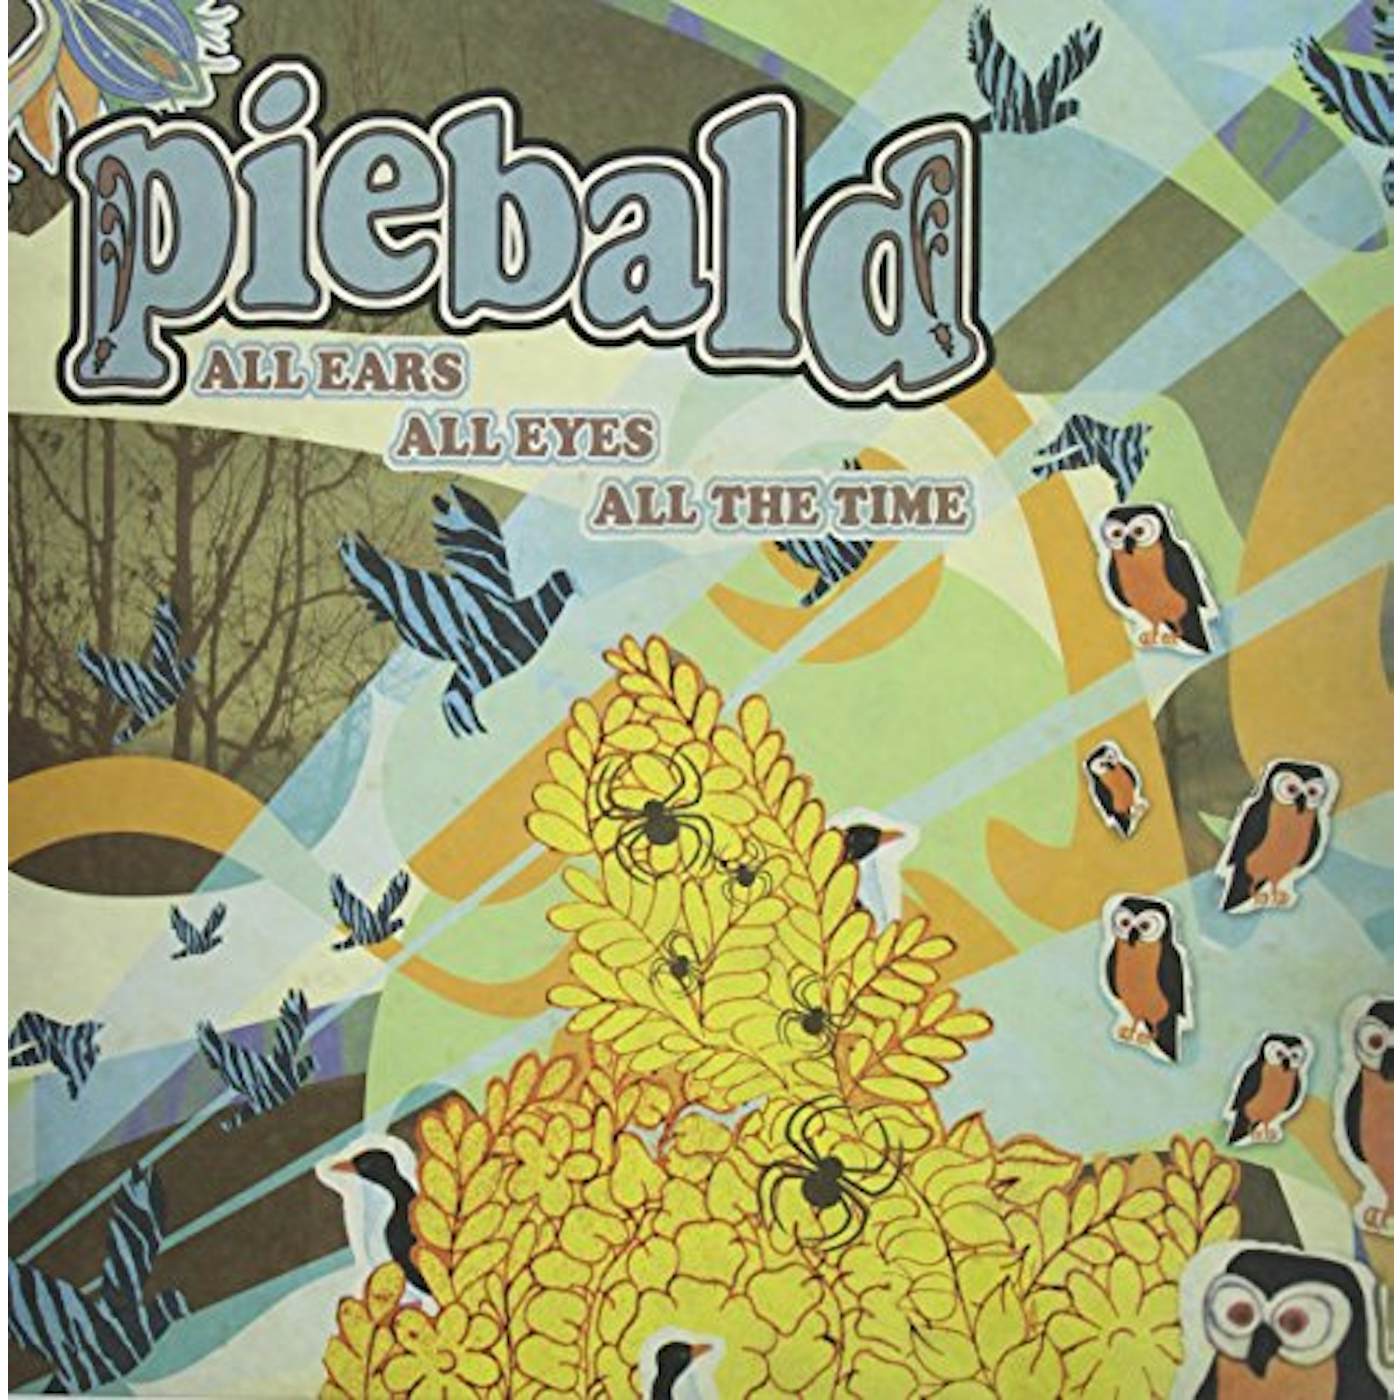 Piebald All Ears All Eyes All The Time Vinyl Record